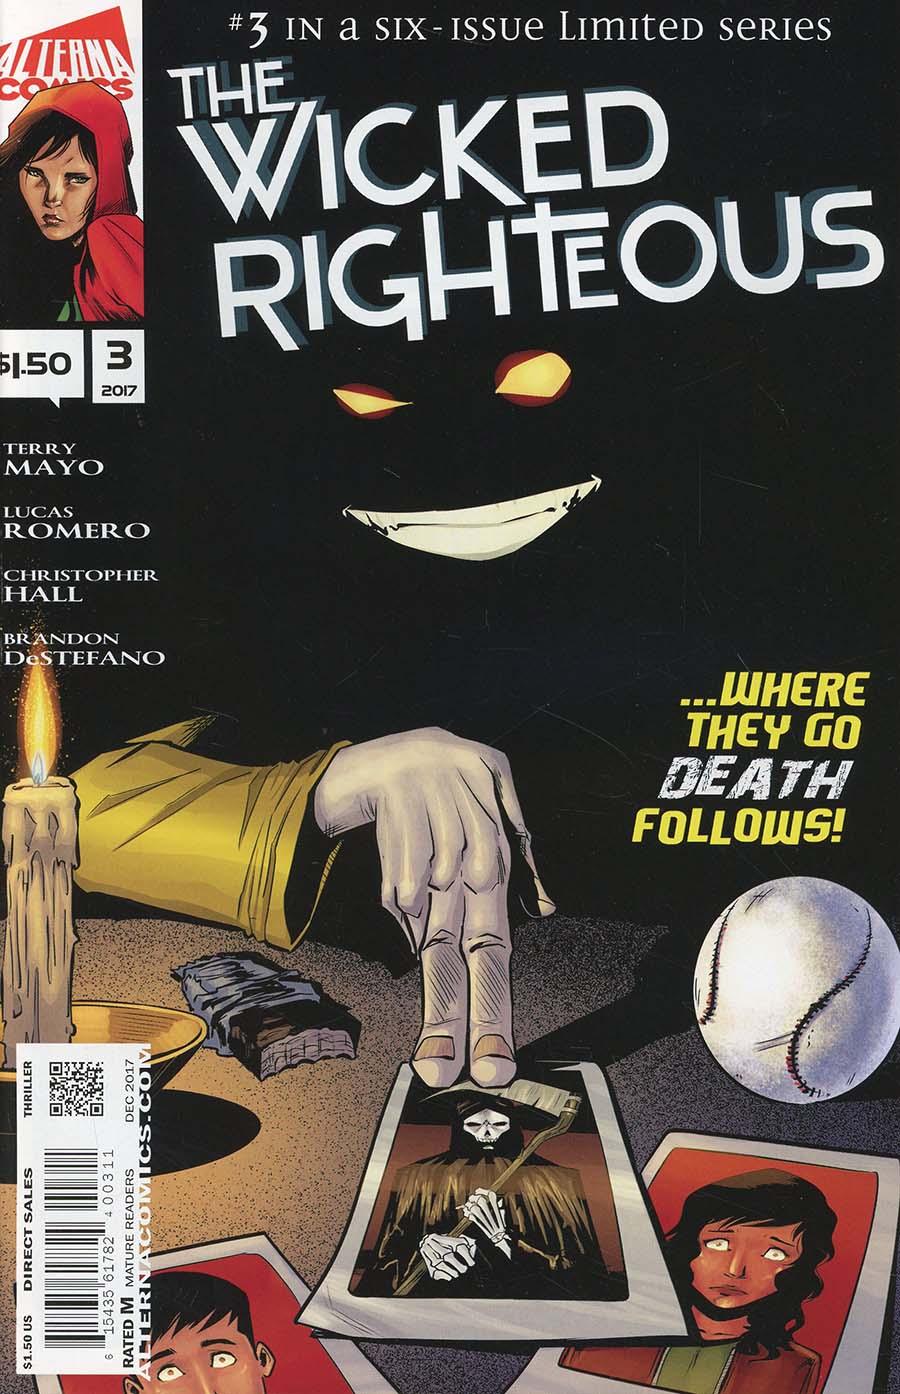 Wicked Righteous Vol. 1 #3